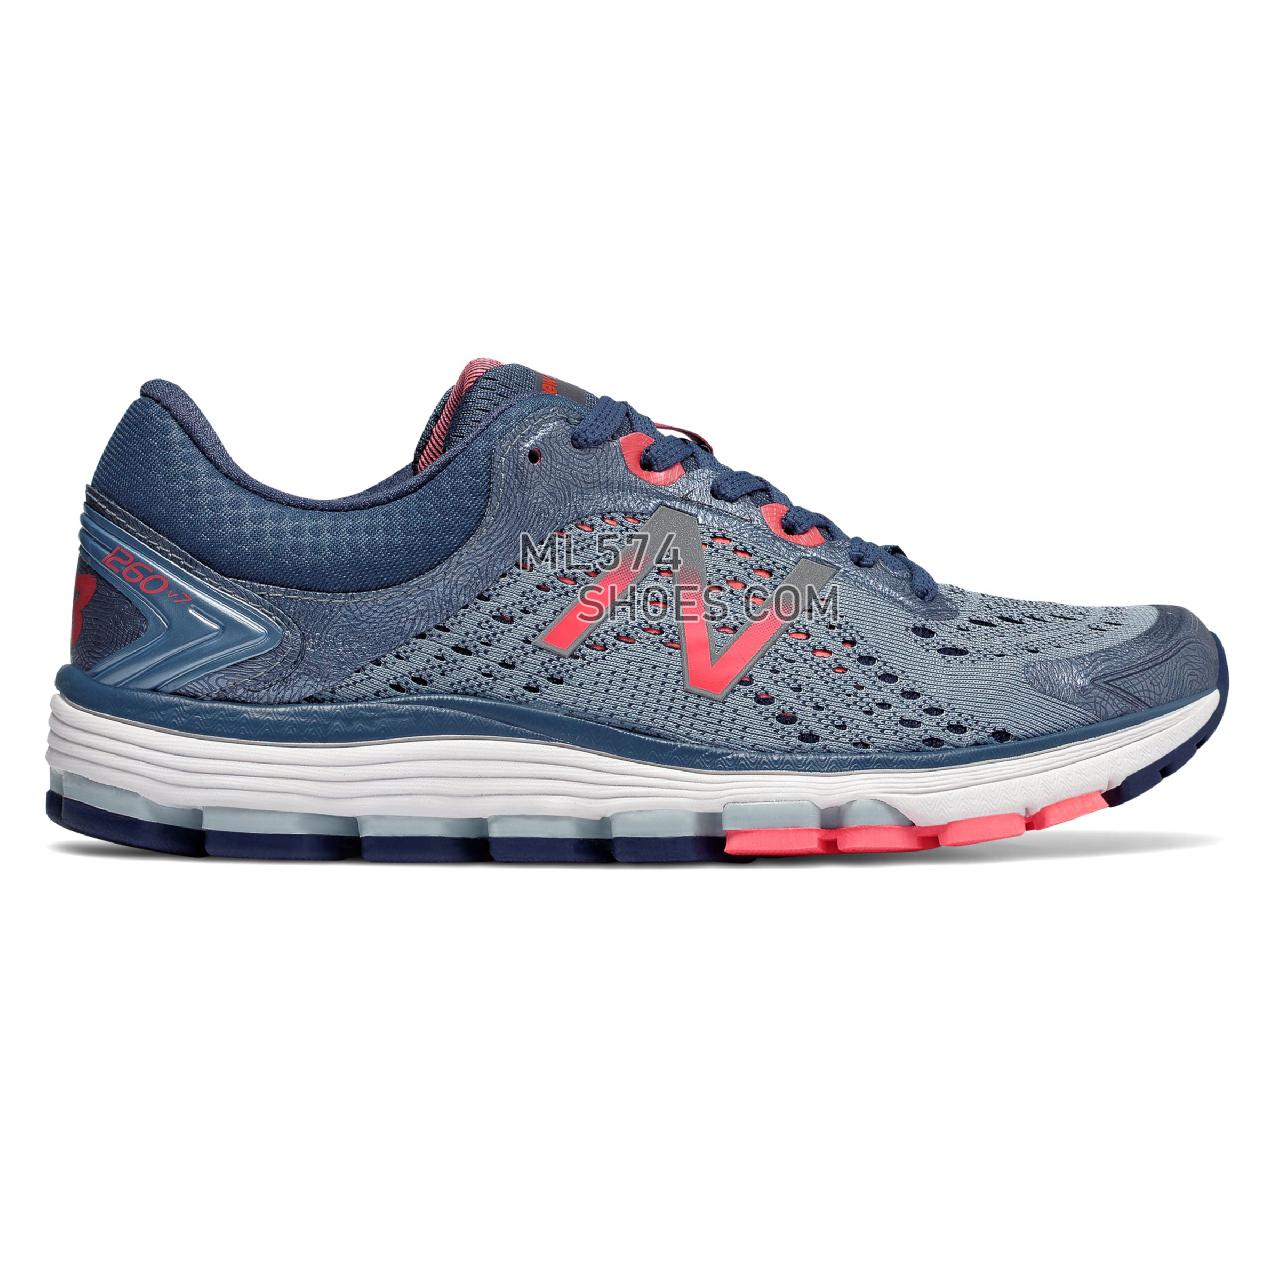 New Balance 1260v7 - Women's 1260 - Running Reflection with Vintage Indigo and Vivid Coral - W1260VC7